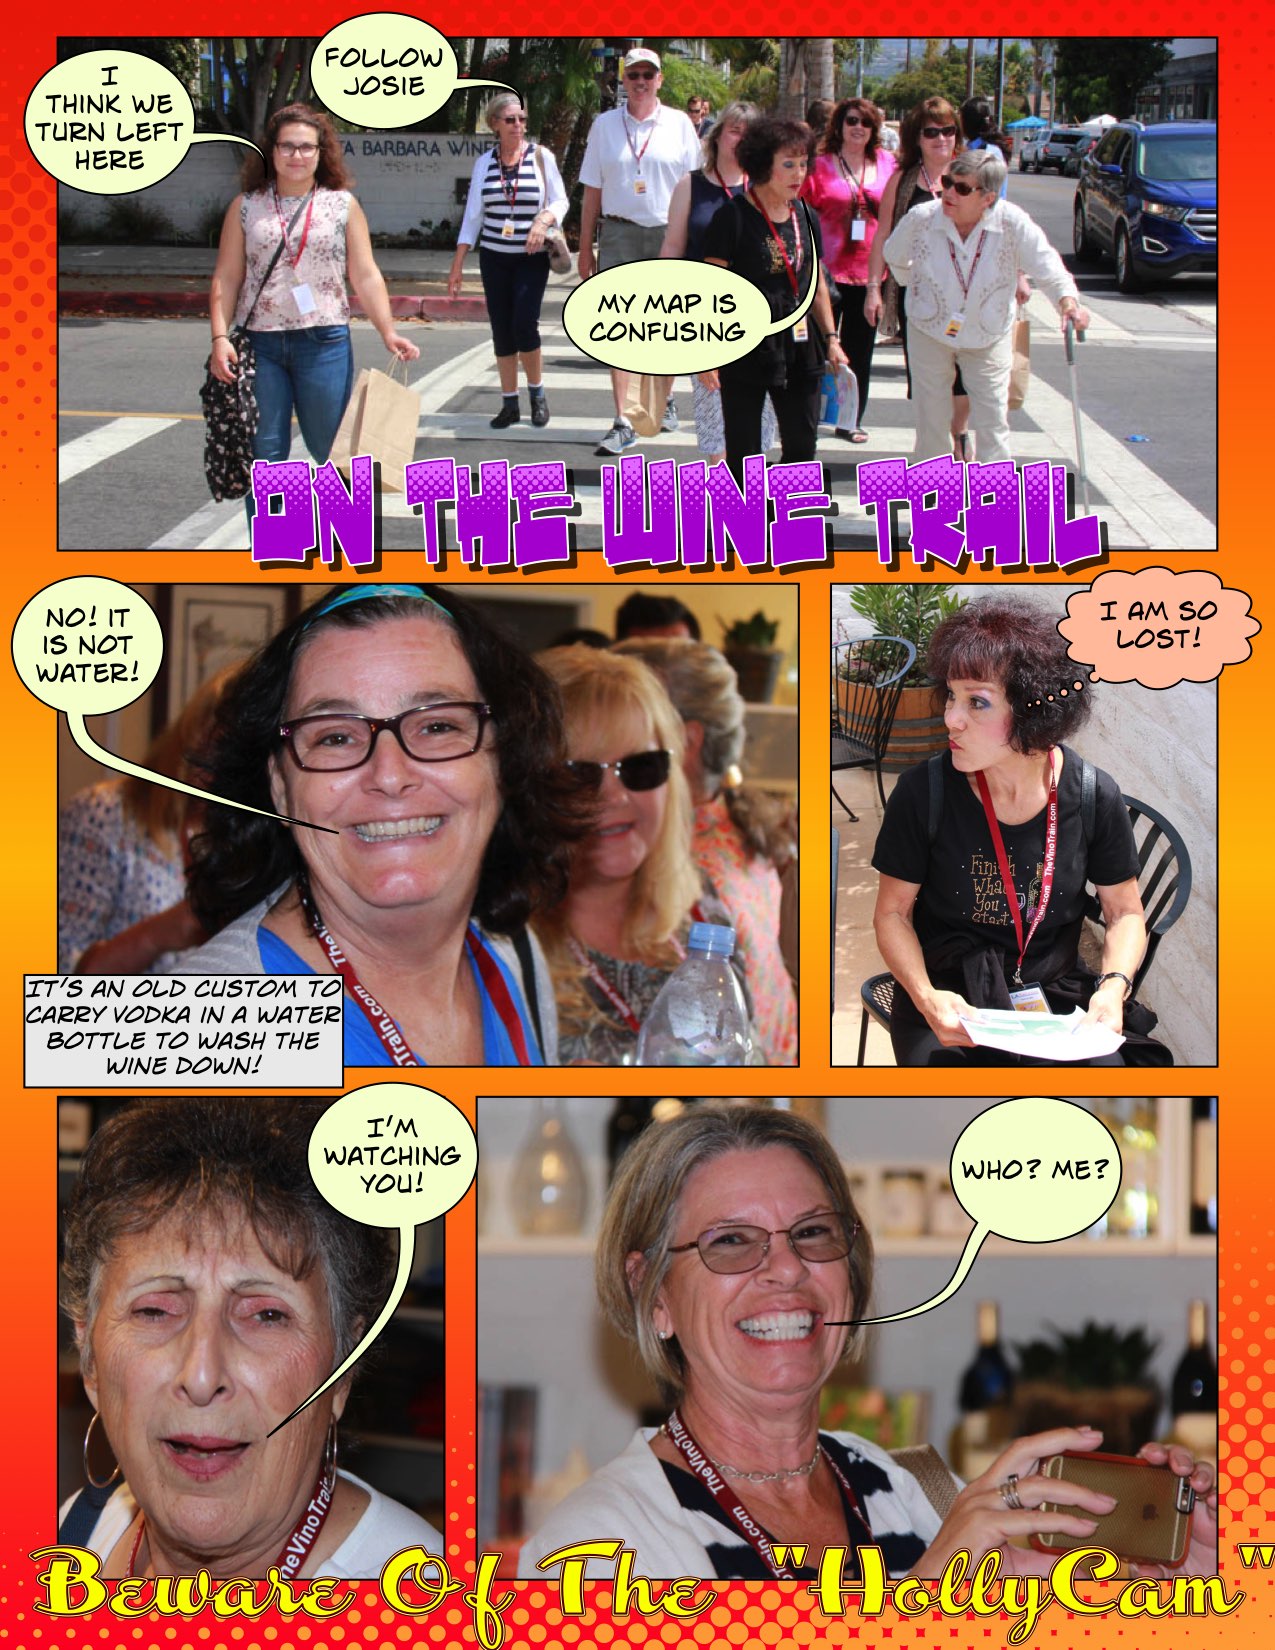 Comic view of the August 6th Vino Train Adventure